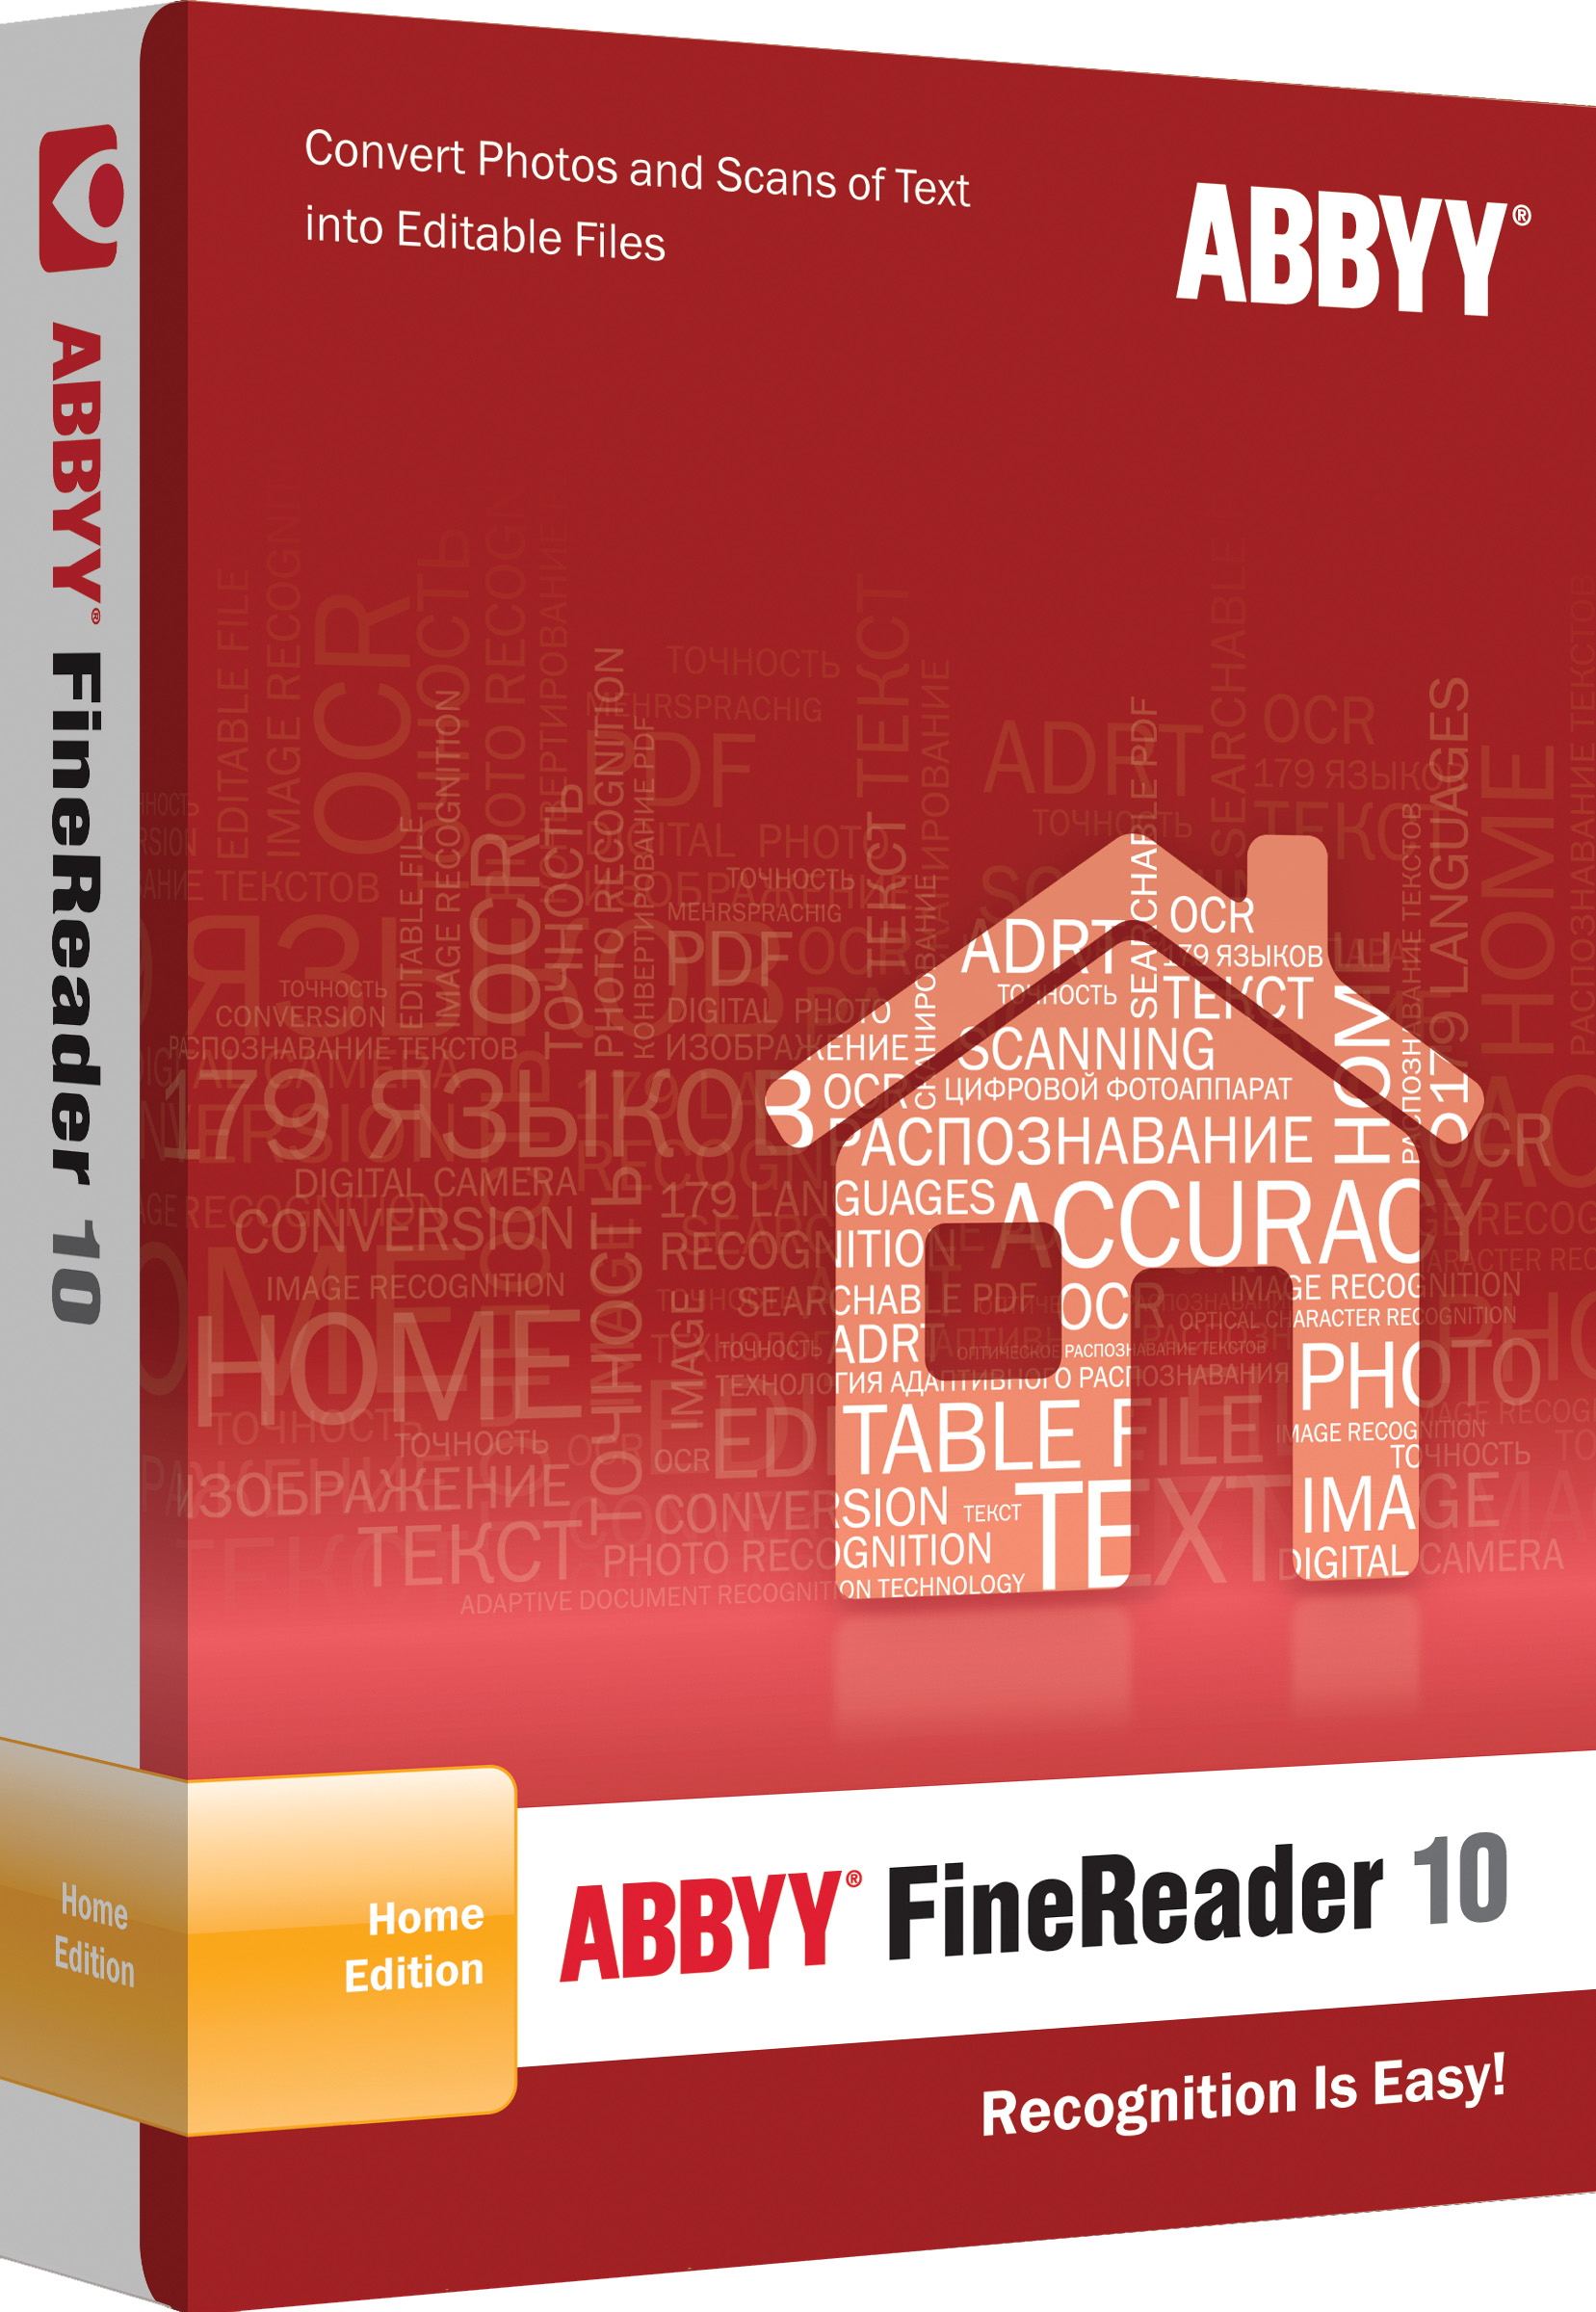 Buy ABBYY FineReader 10 Home Edition and download